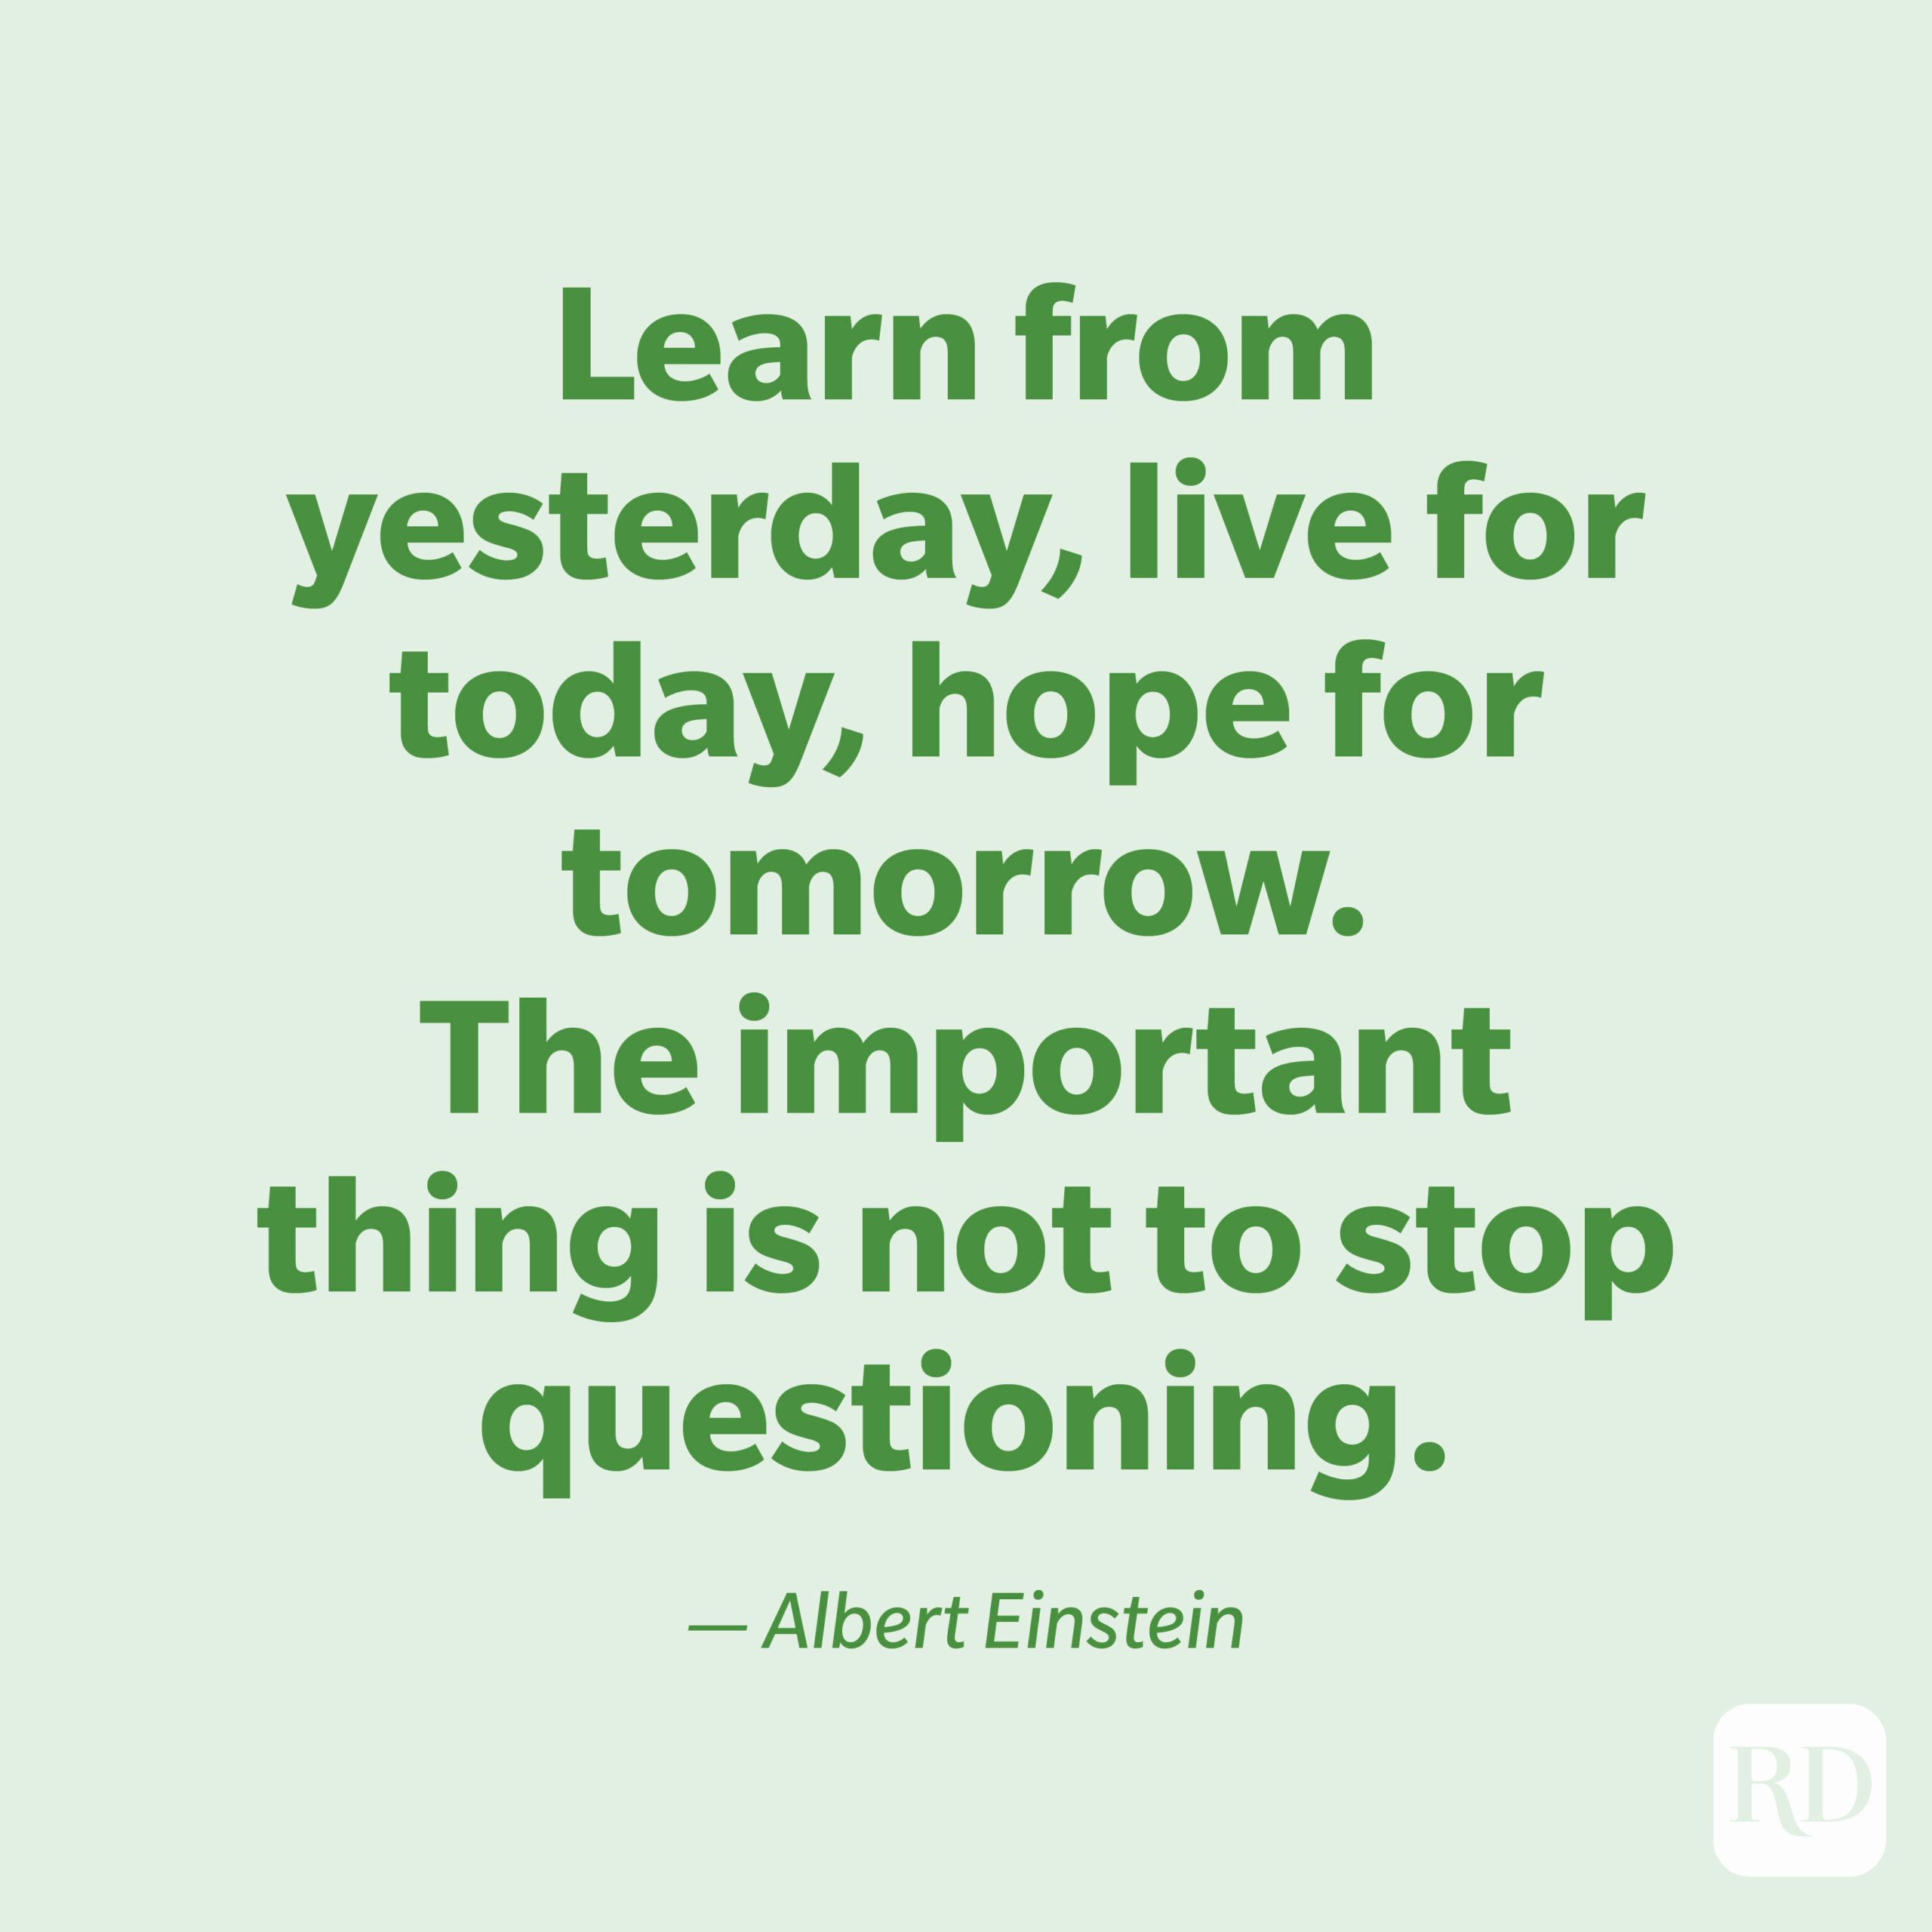  "Learn from yesterday, live for today, hope for tomorrow. The important thing is not to stop questioning." —Albert Einstein.